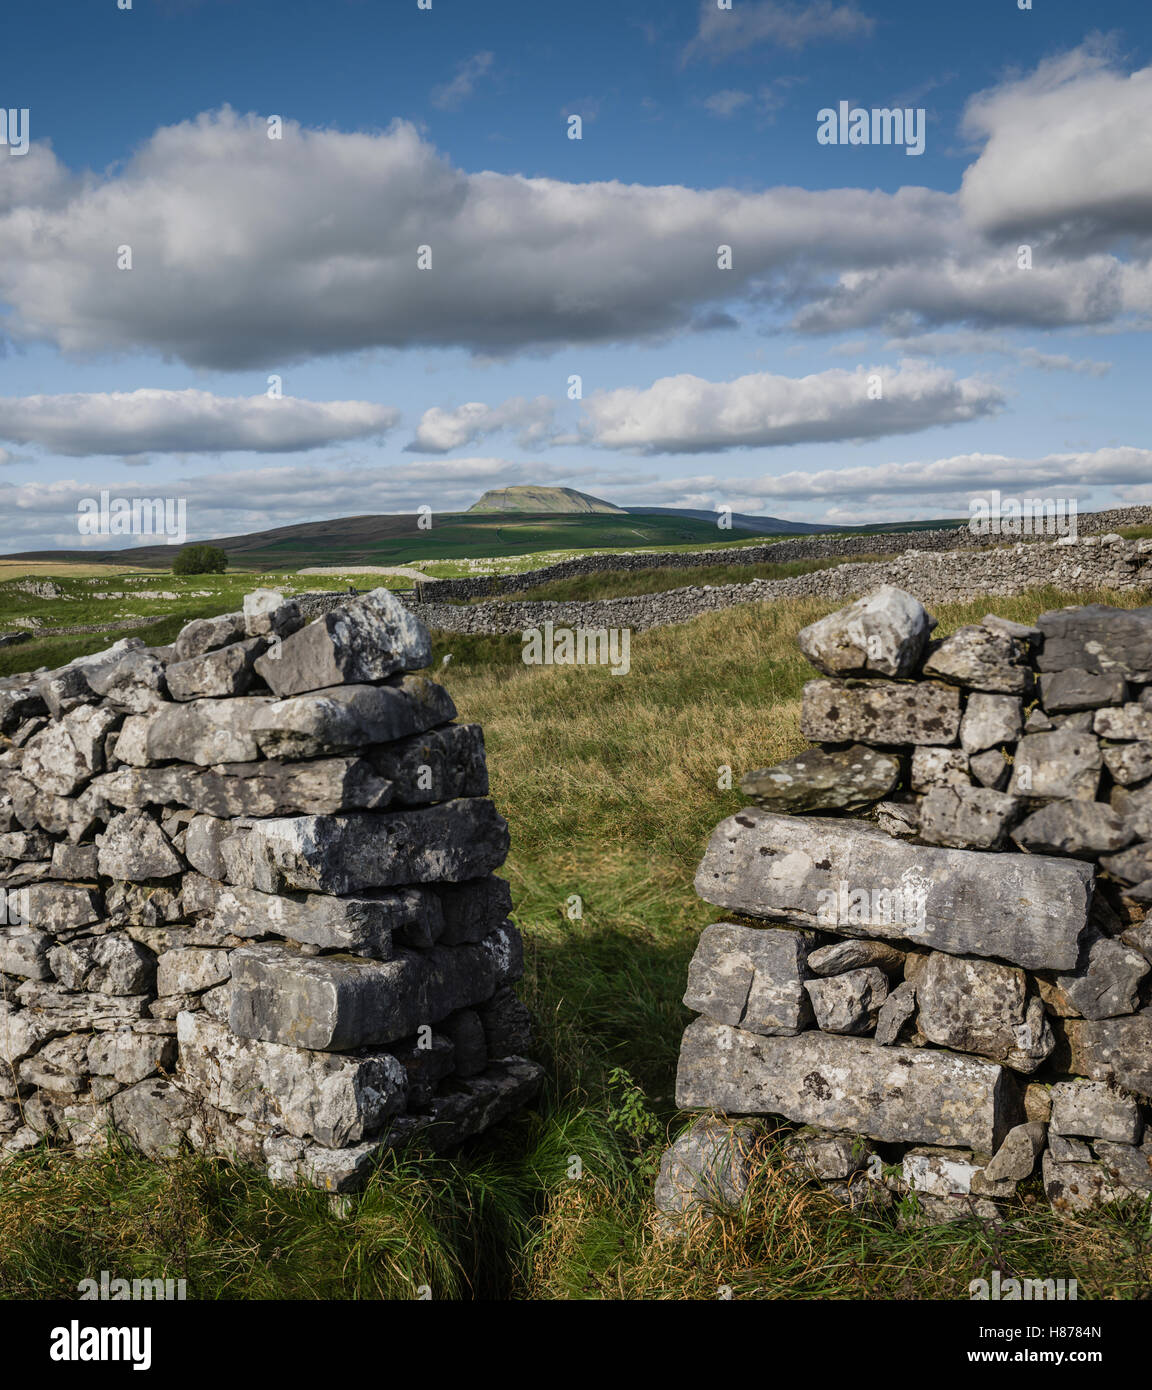 The landscape around Stainforth, Yorkshire Dales, UK. Stock Photo